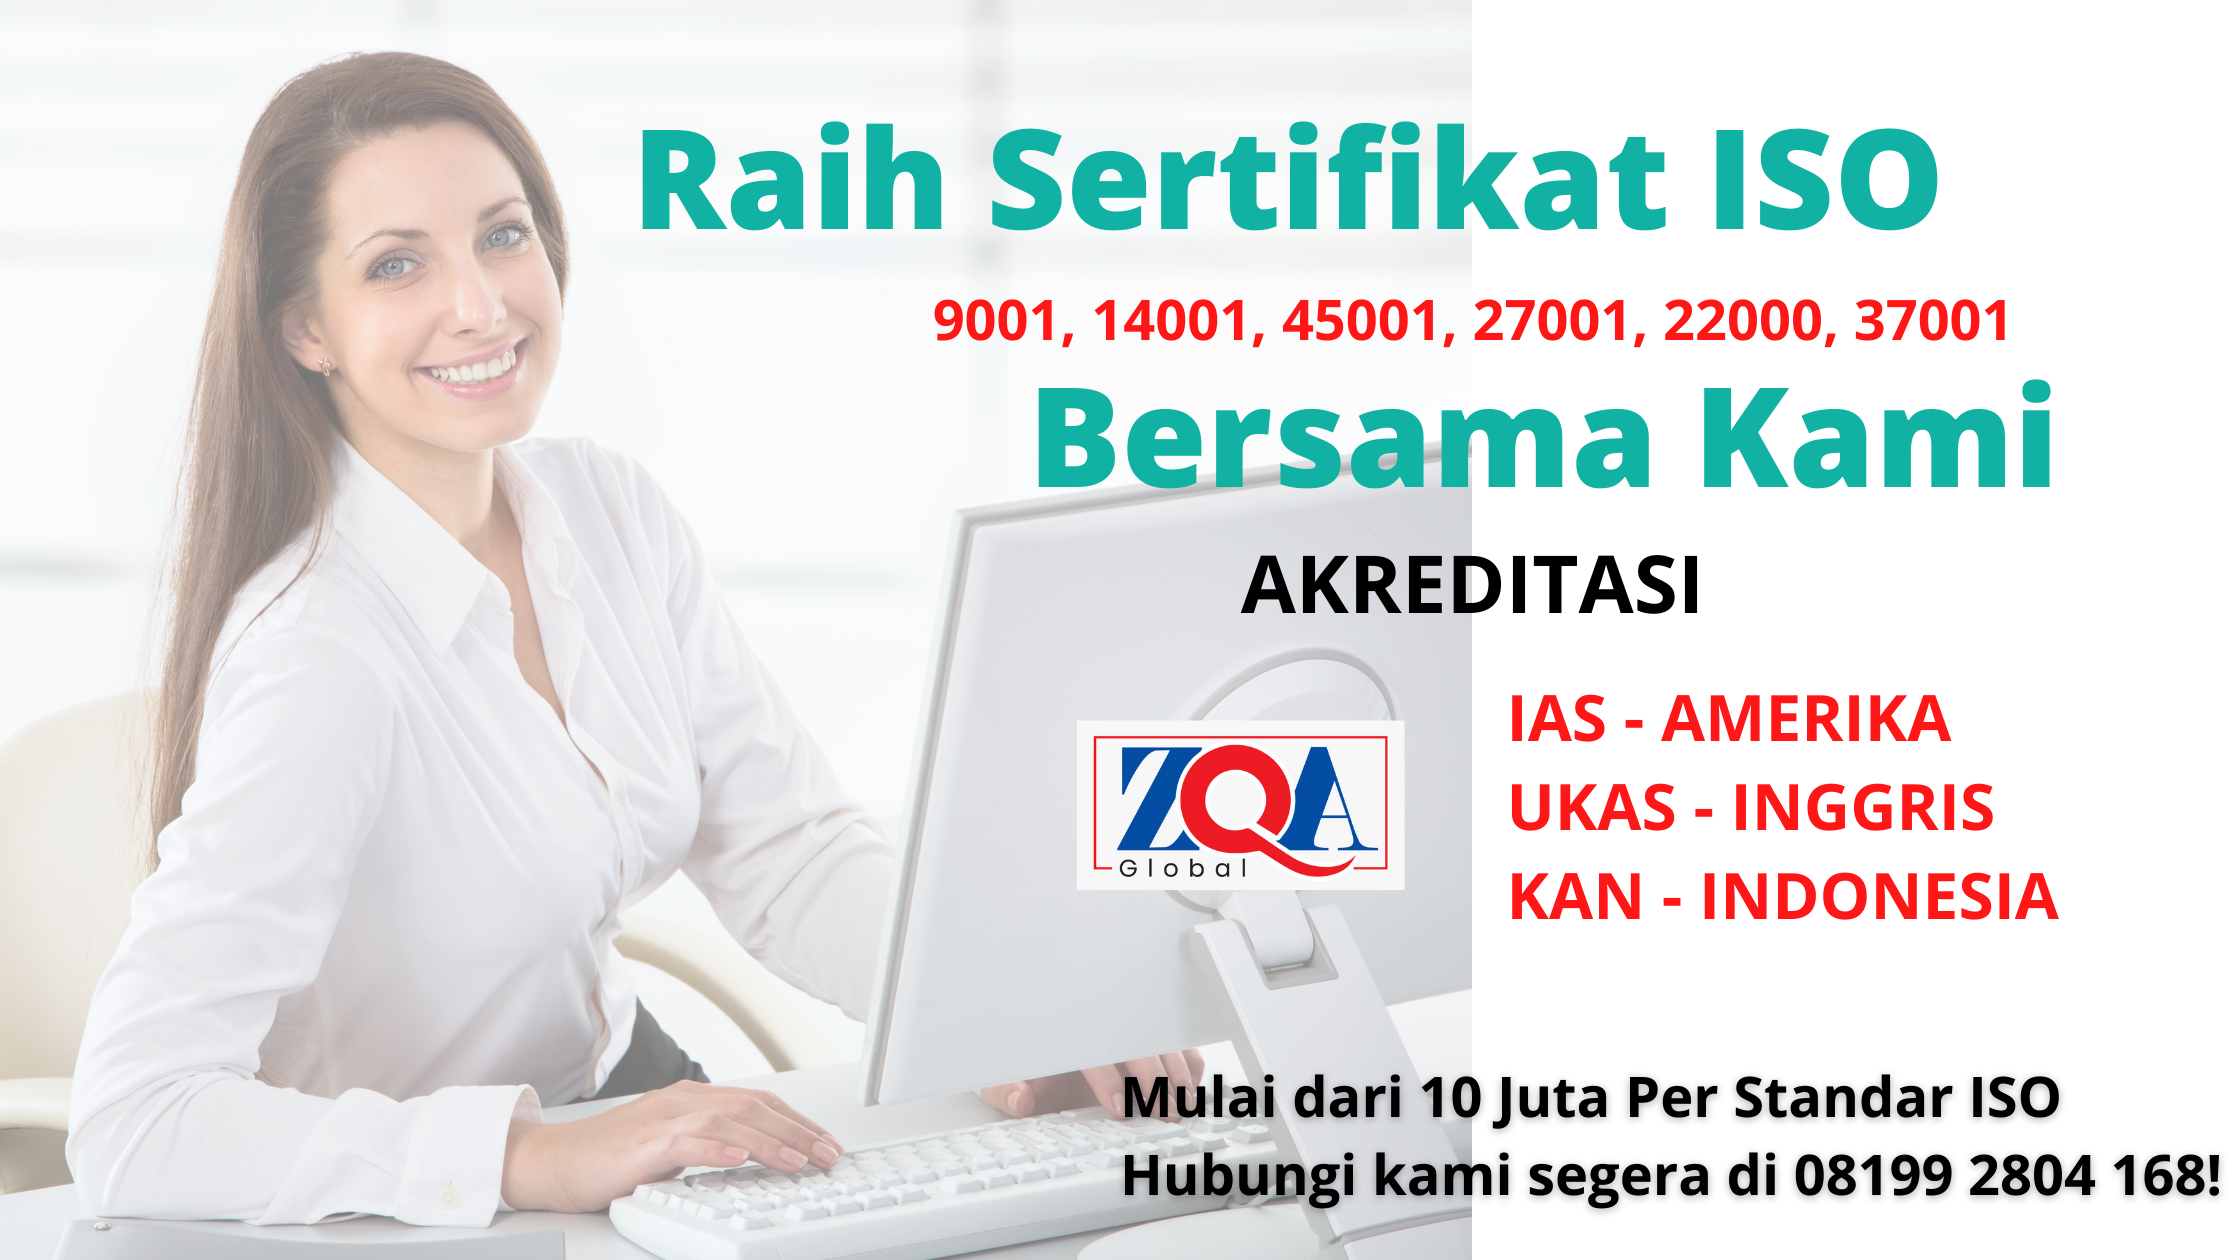 You are currently viewing Sertifikat ISO Harga Promo 2022